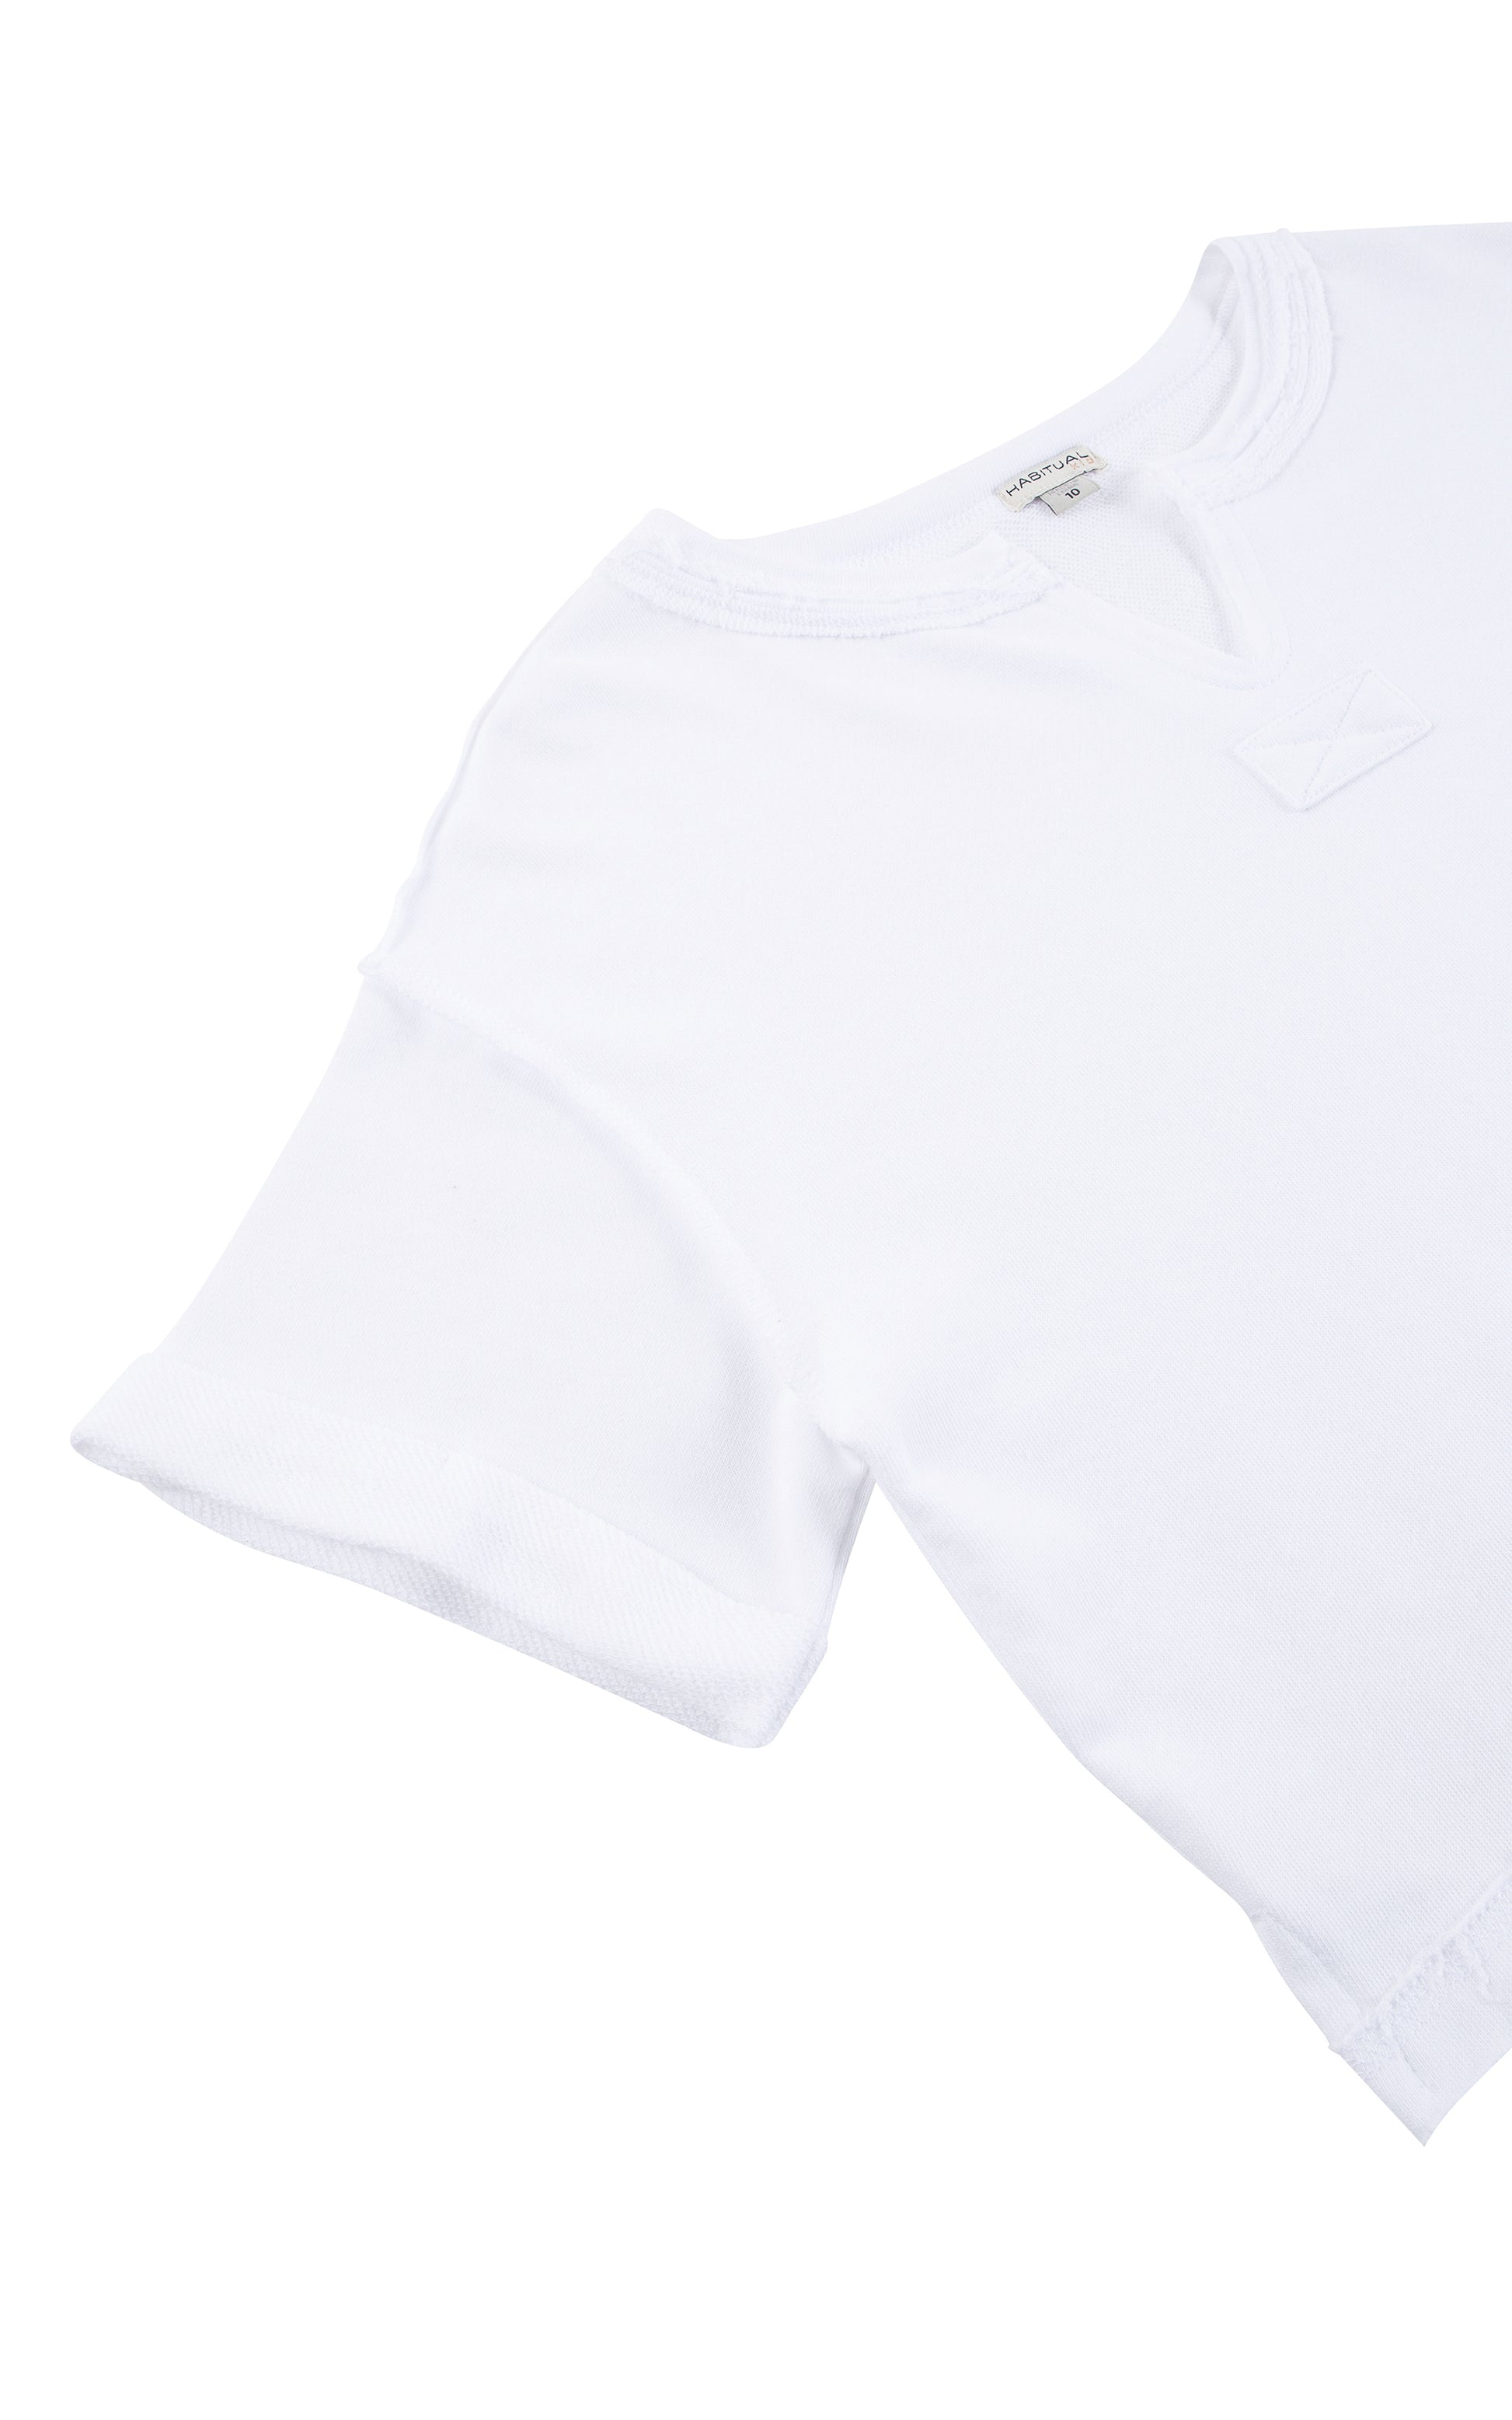 Close up of white French terry cloth shirt